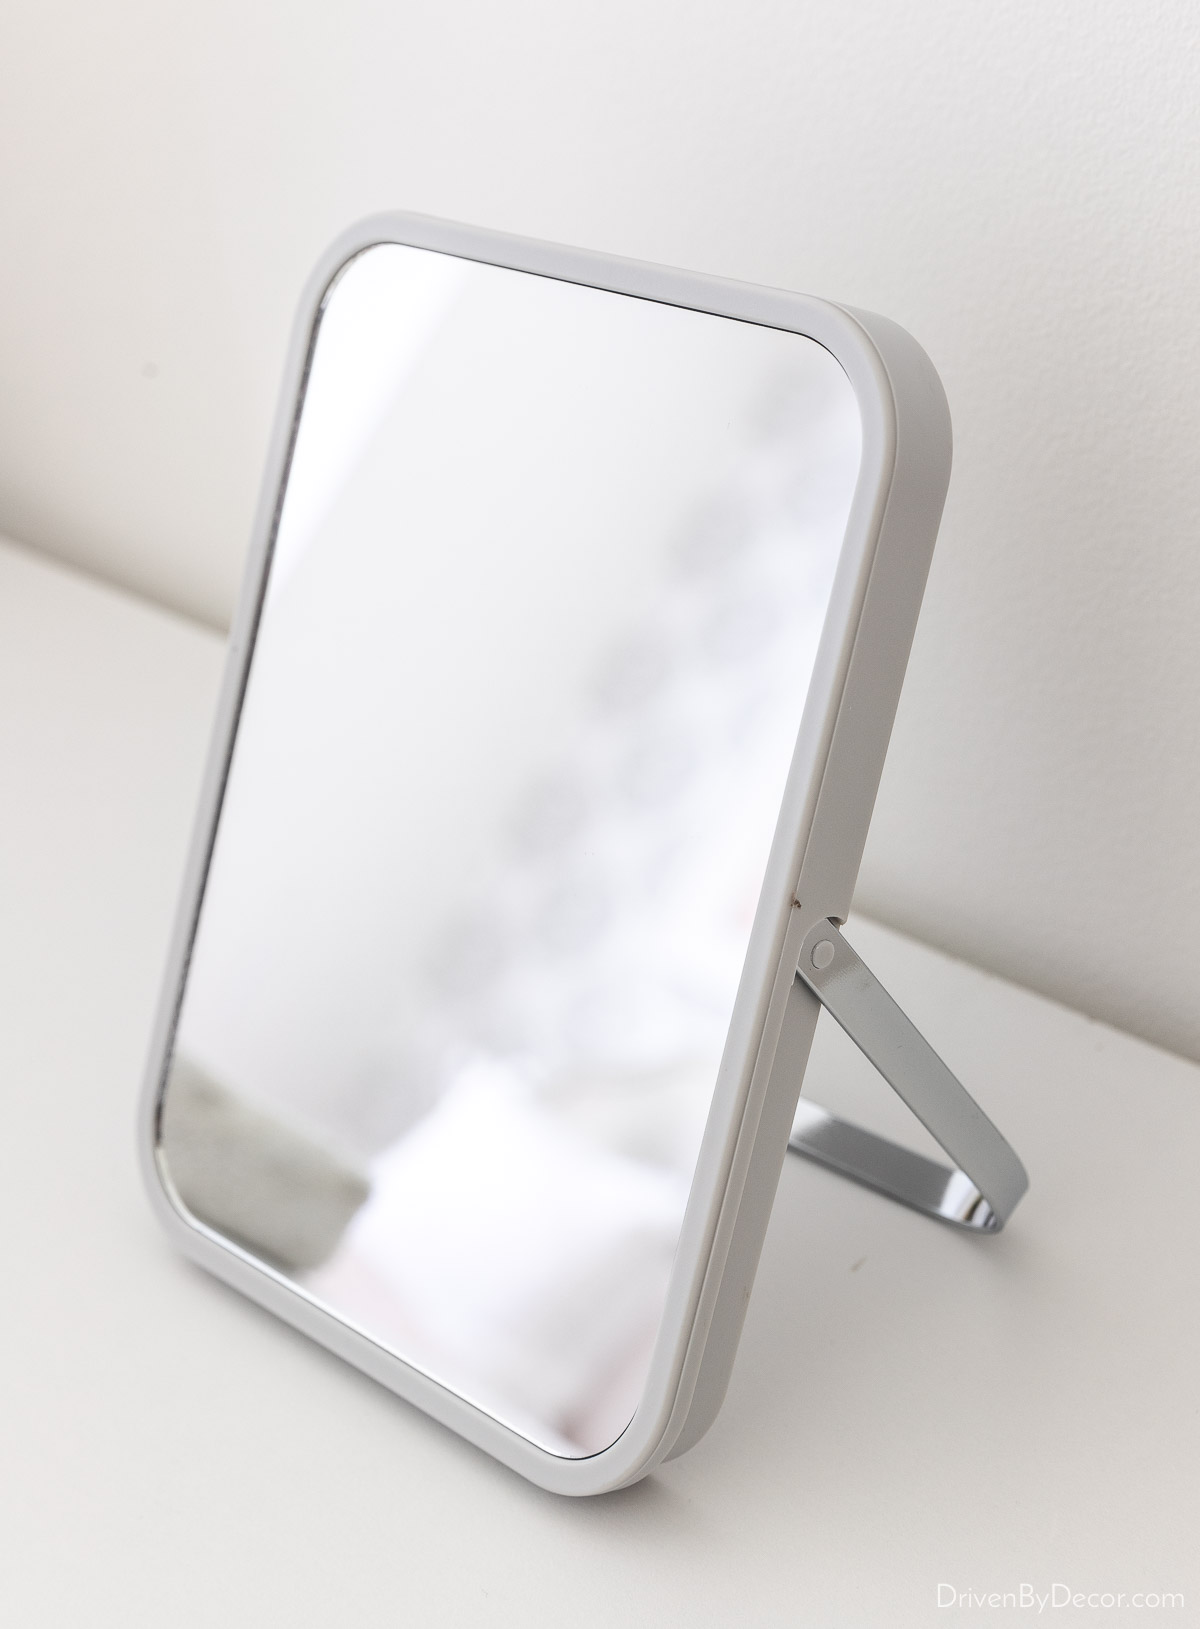 Vanity mirror to put on your college packing list!